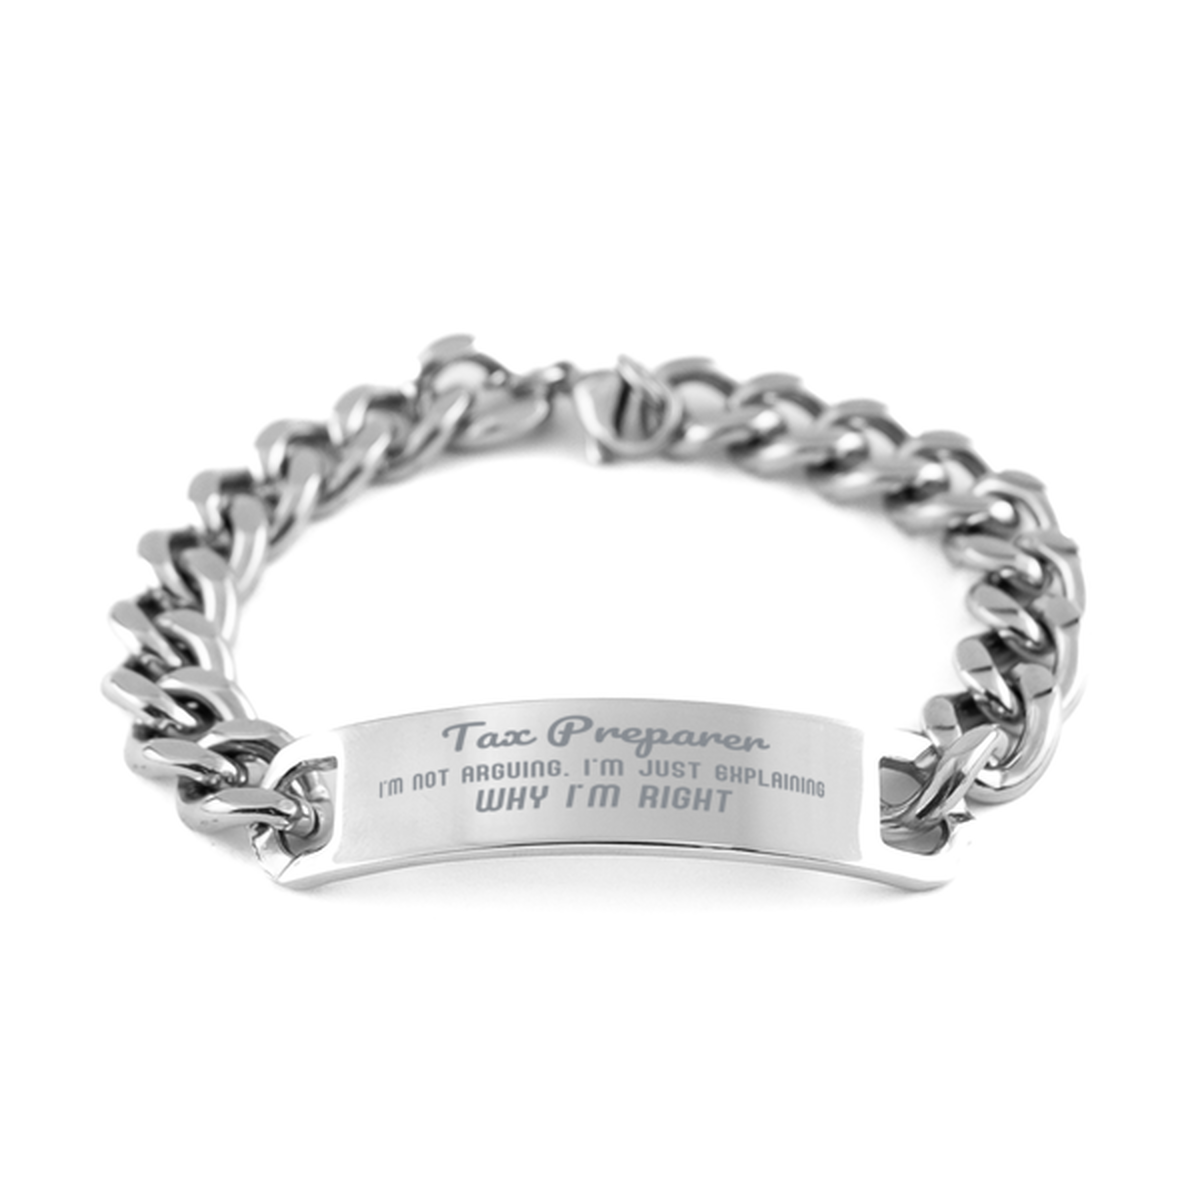 Tax Preparer I'm not Arguing. I'm Just Explaining Why I'm RIGHT Cuban Chain Stainless Steel Bracelet, Graduation Birthday Christmas Tax Preparer Gifts For Tax Preparer Funny Saying Quote Present for Men Women Coworker